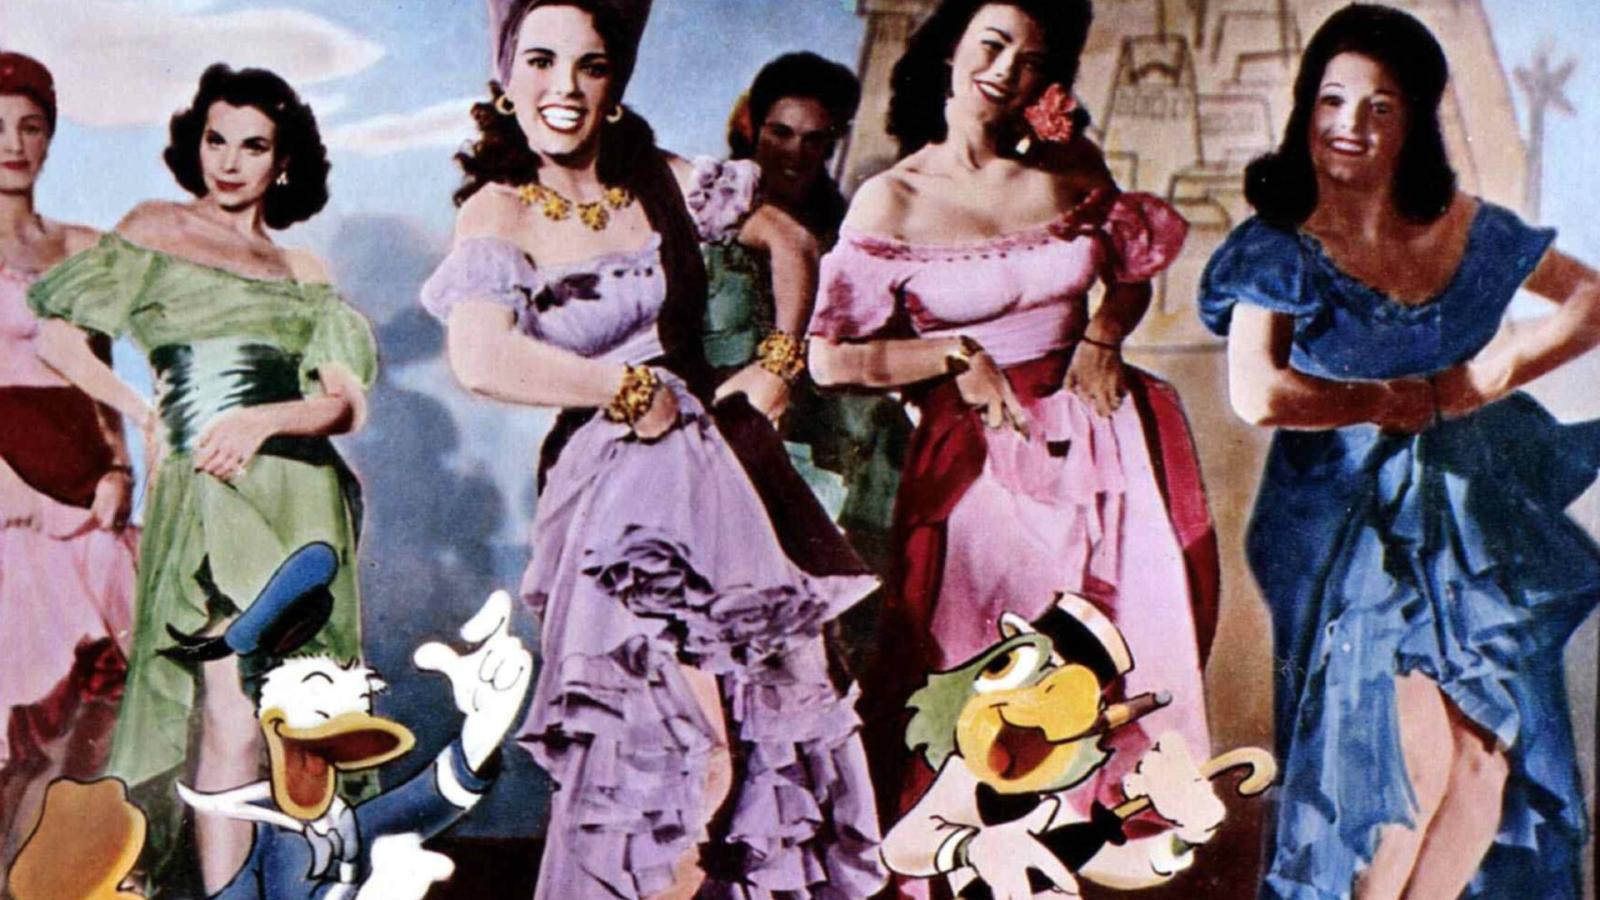 These 10 Obscure Disney Films Are Actually the Best (No, Really) - image 4